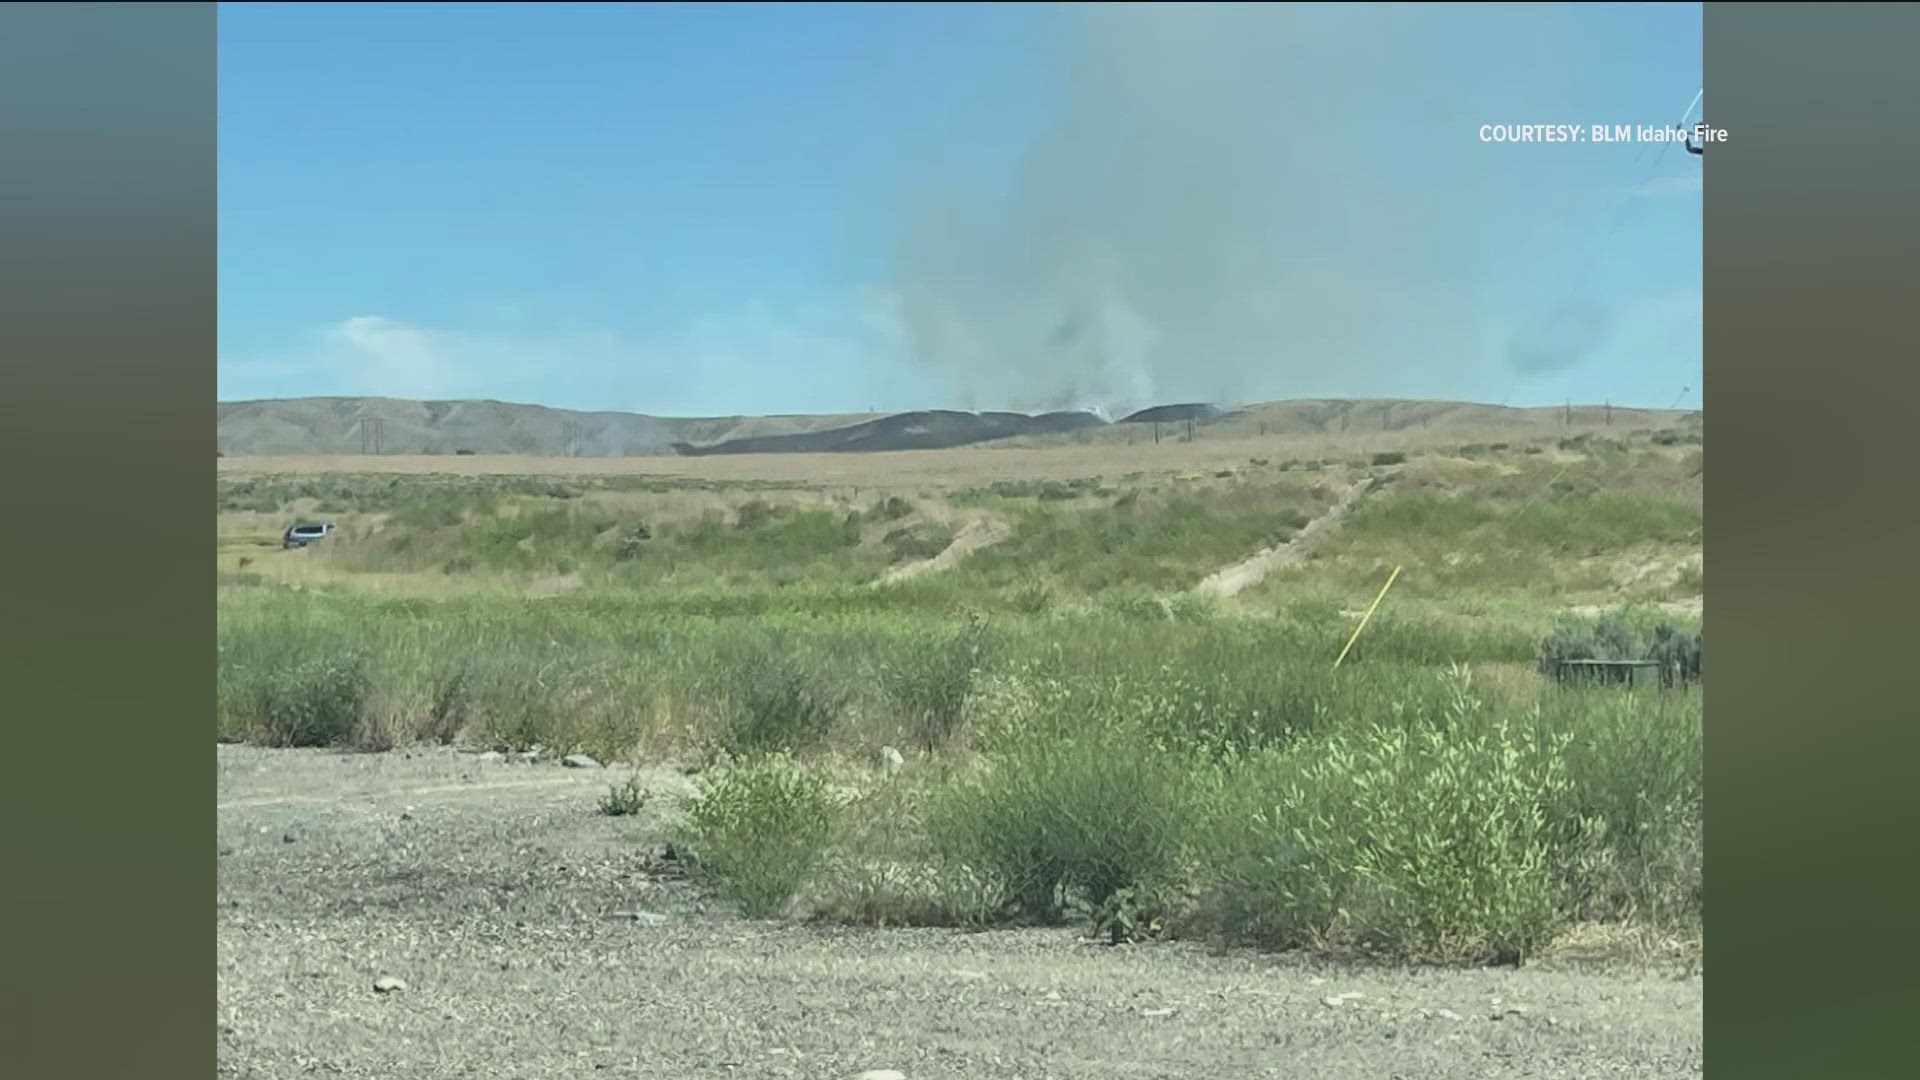 After an investigation, the sheriff's office said a teen launched a motor-style firework, which caused the fire in grass and brush.